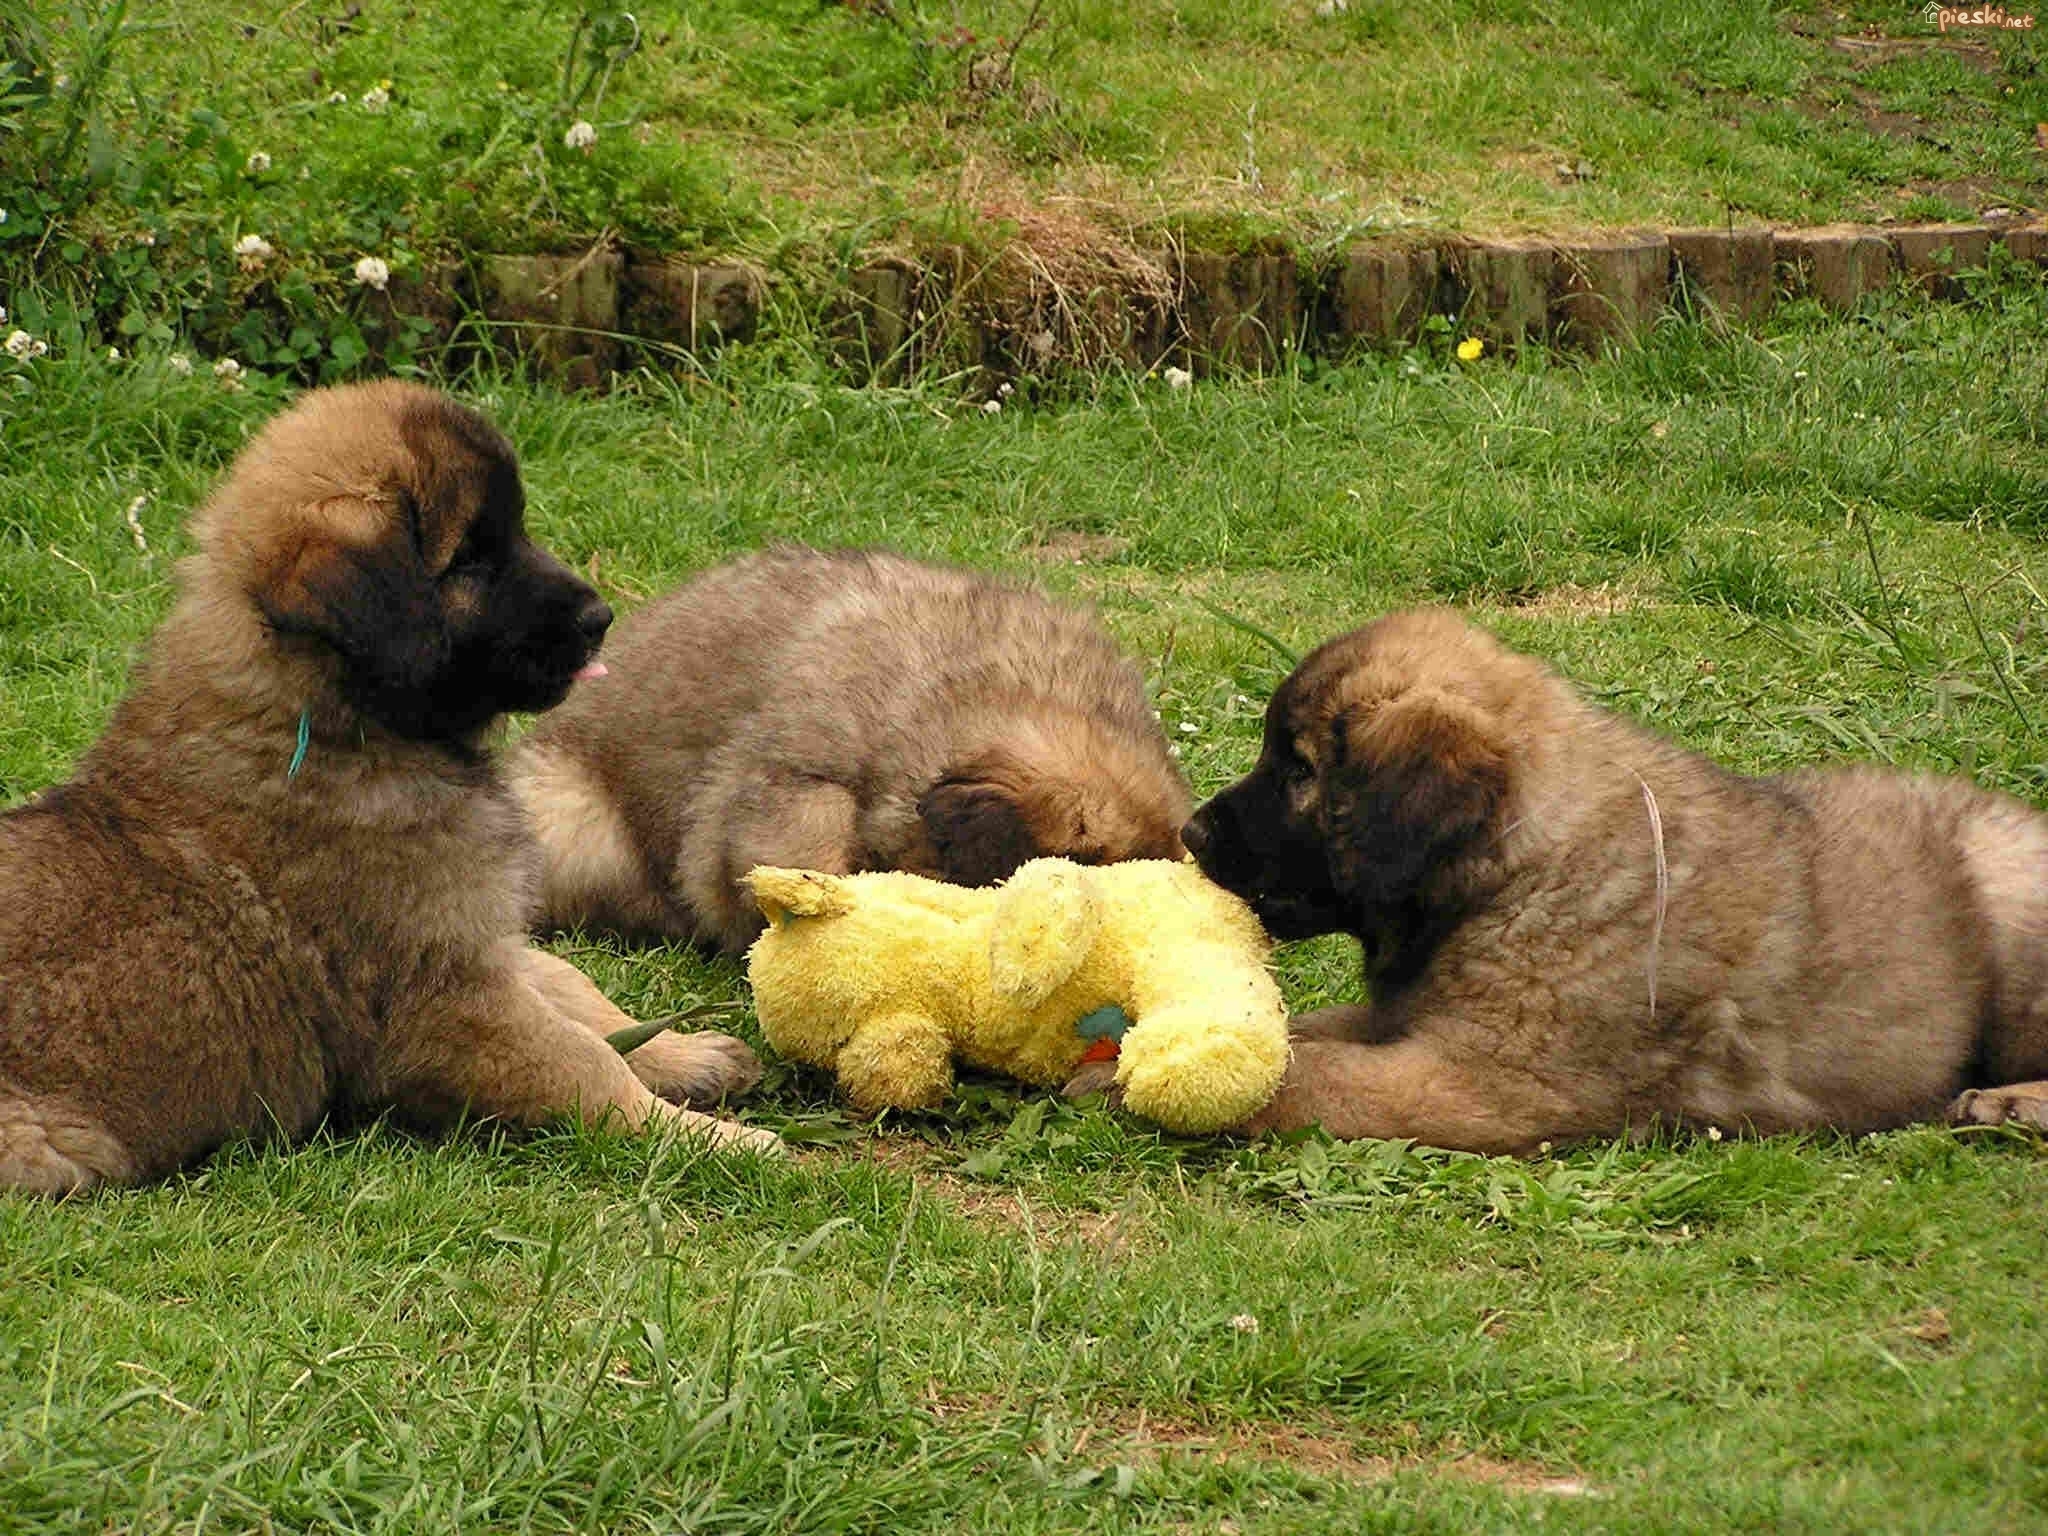 Leonberger puppies play